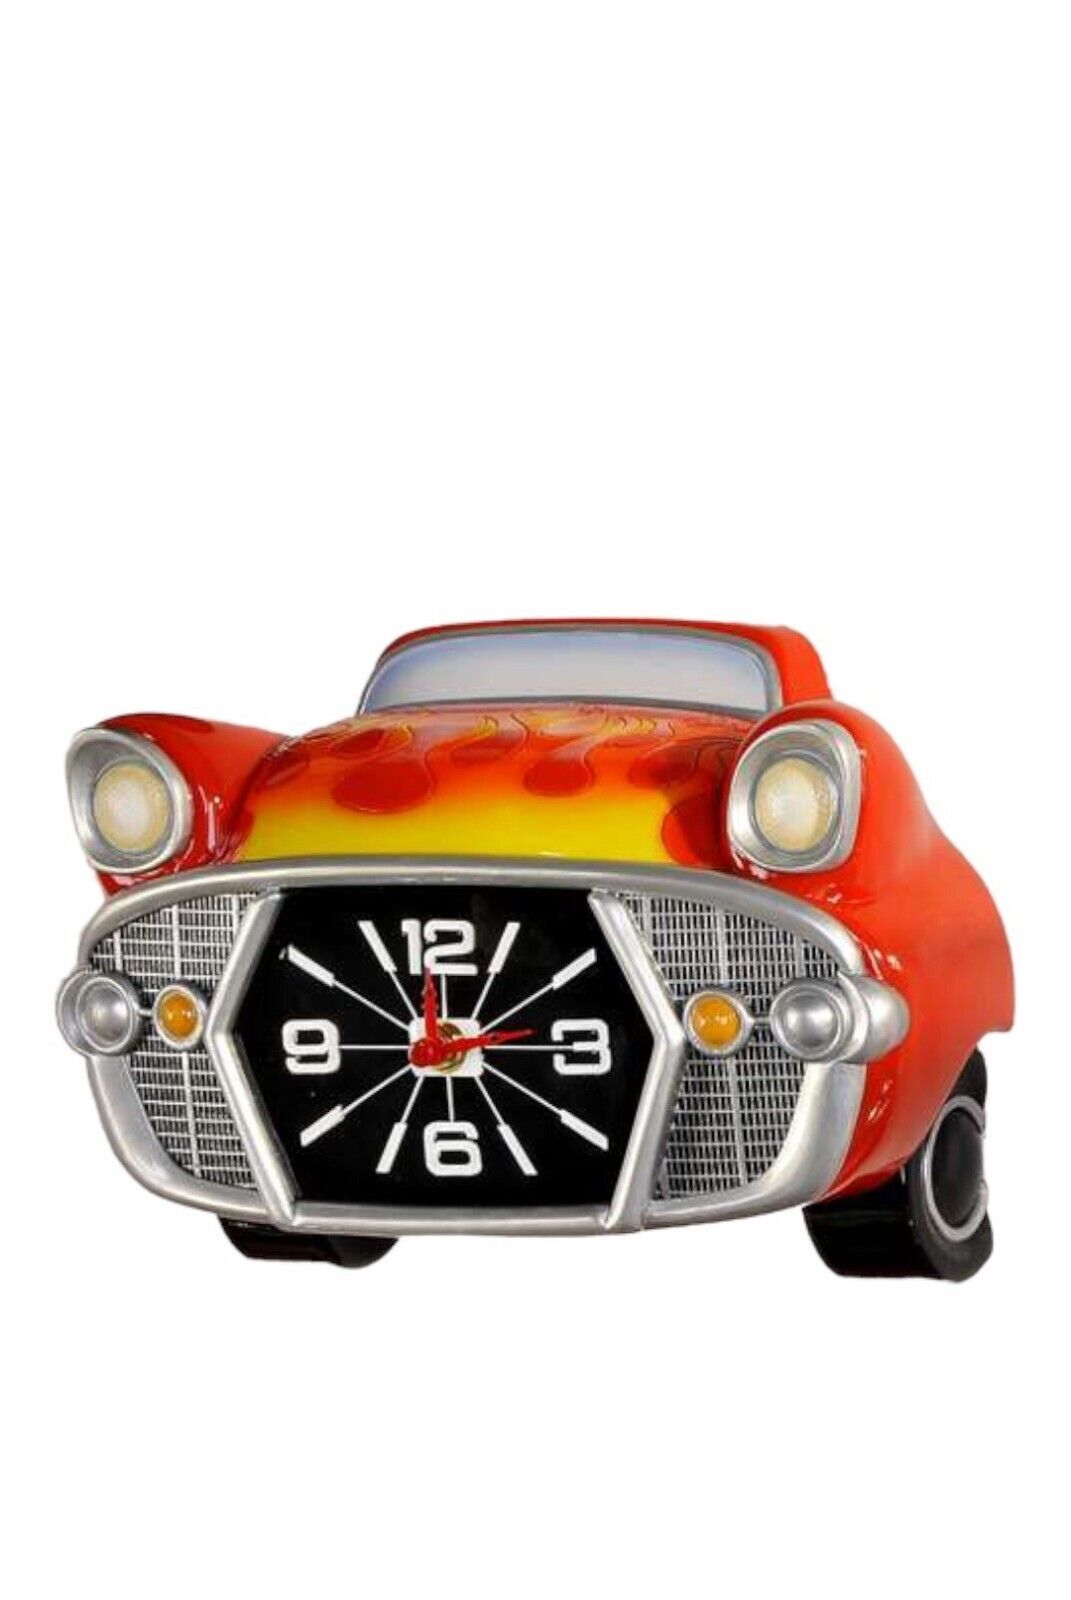 Vintage Car Design Wall Clock Retro Look Red 10" Long Polyresin Battery Man Cave - $69.29